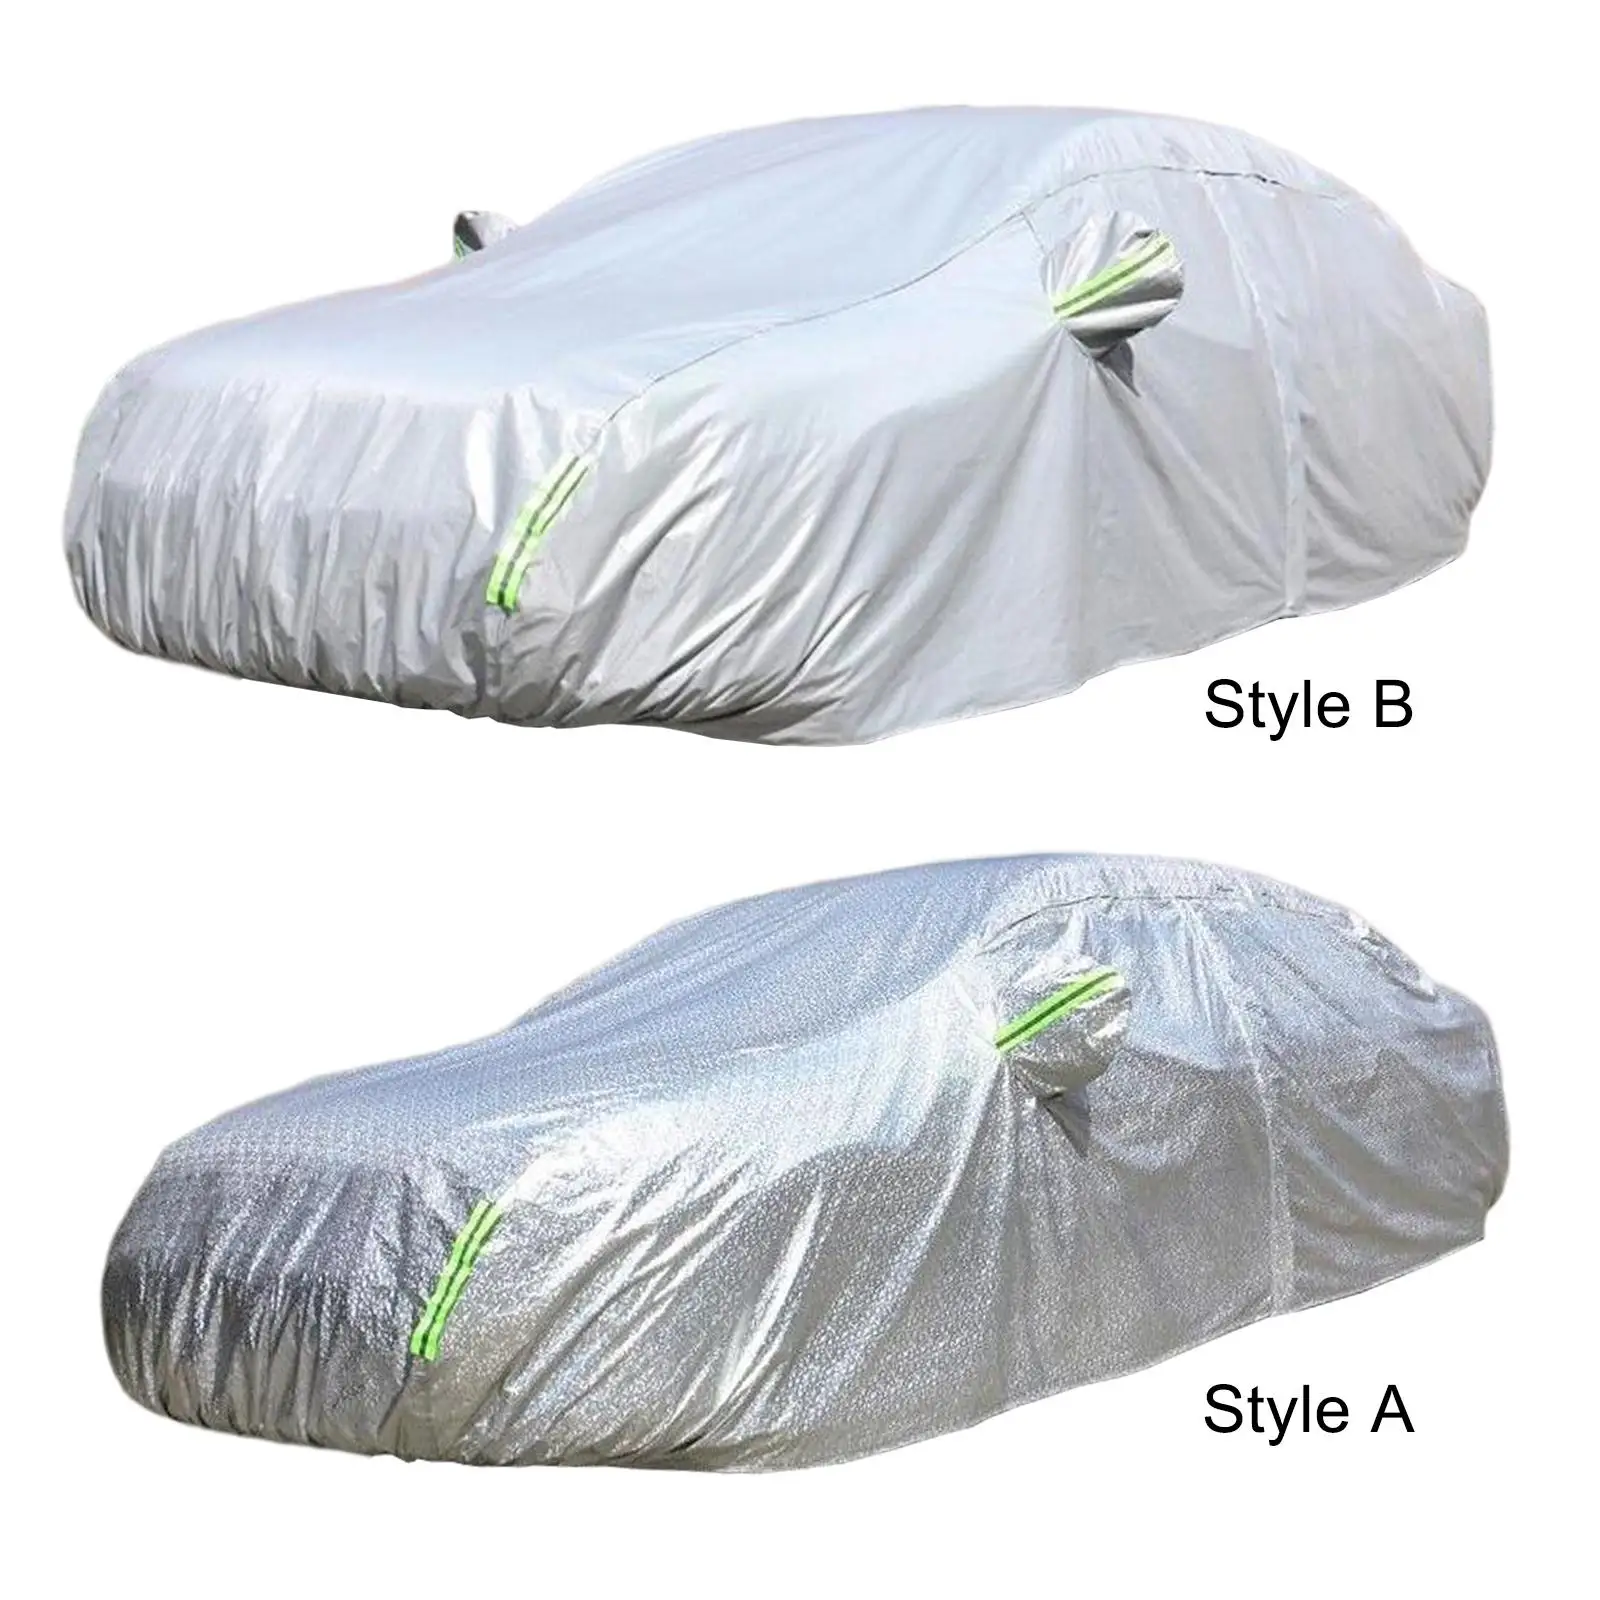 Car Outdoor Full Cover for Byd Atto 3 Yuan Plus Rain Sun Protection with Portable Storage Bag Waterproof weather